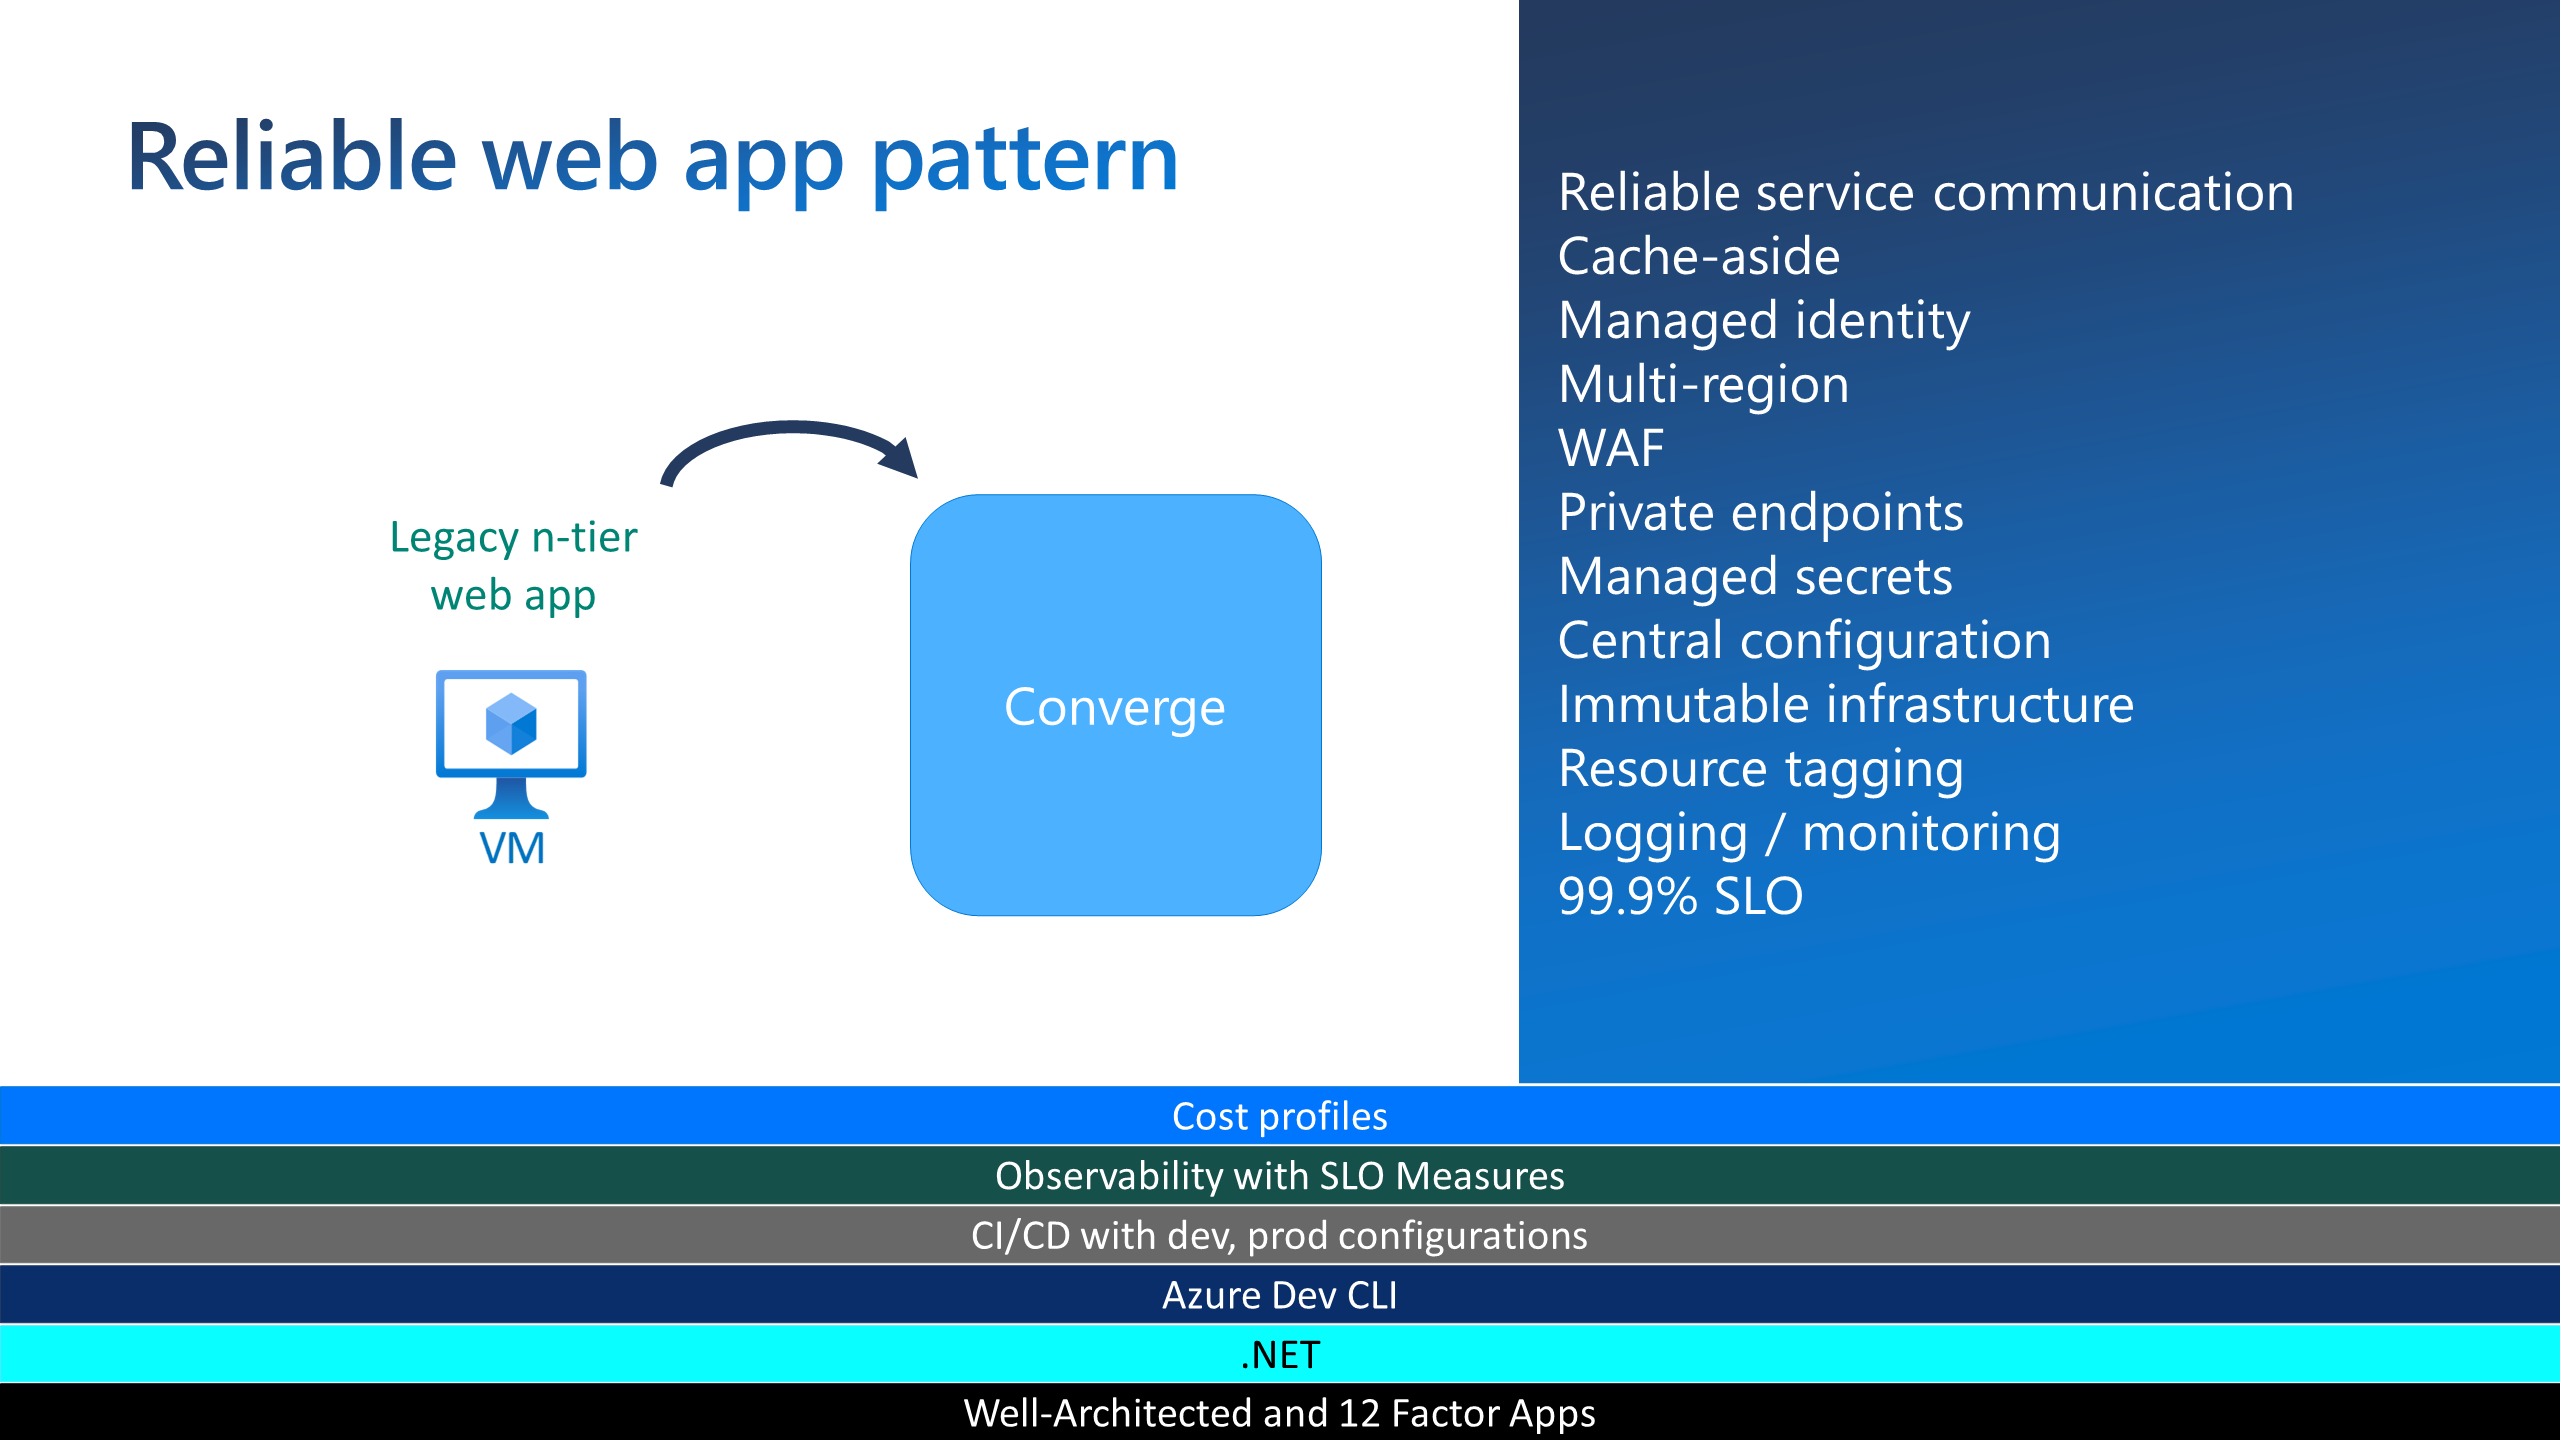 A diagram showing all of the pillars included in the reliable web app pattern